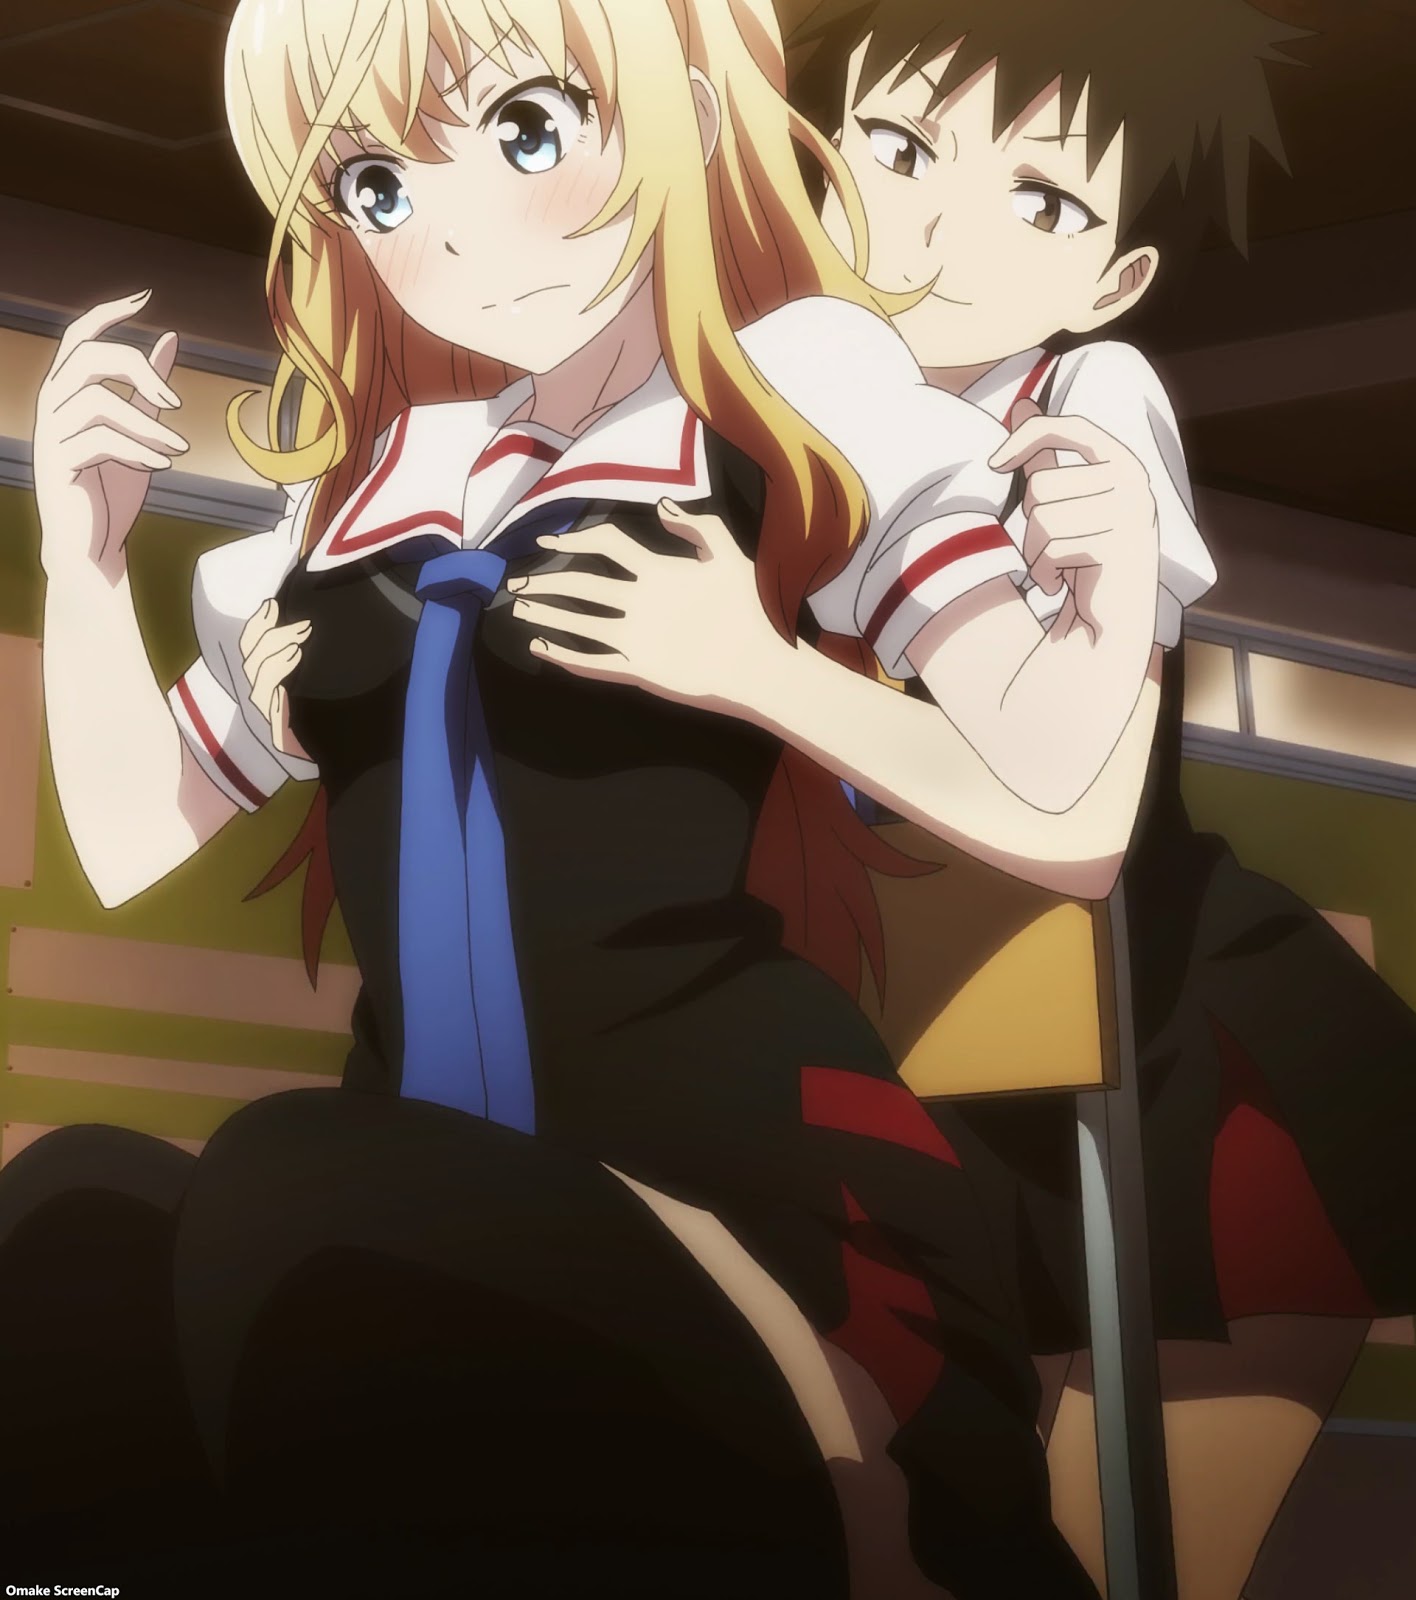 Anime Review: Val x Love Episode 1